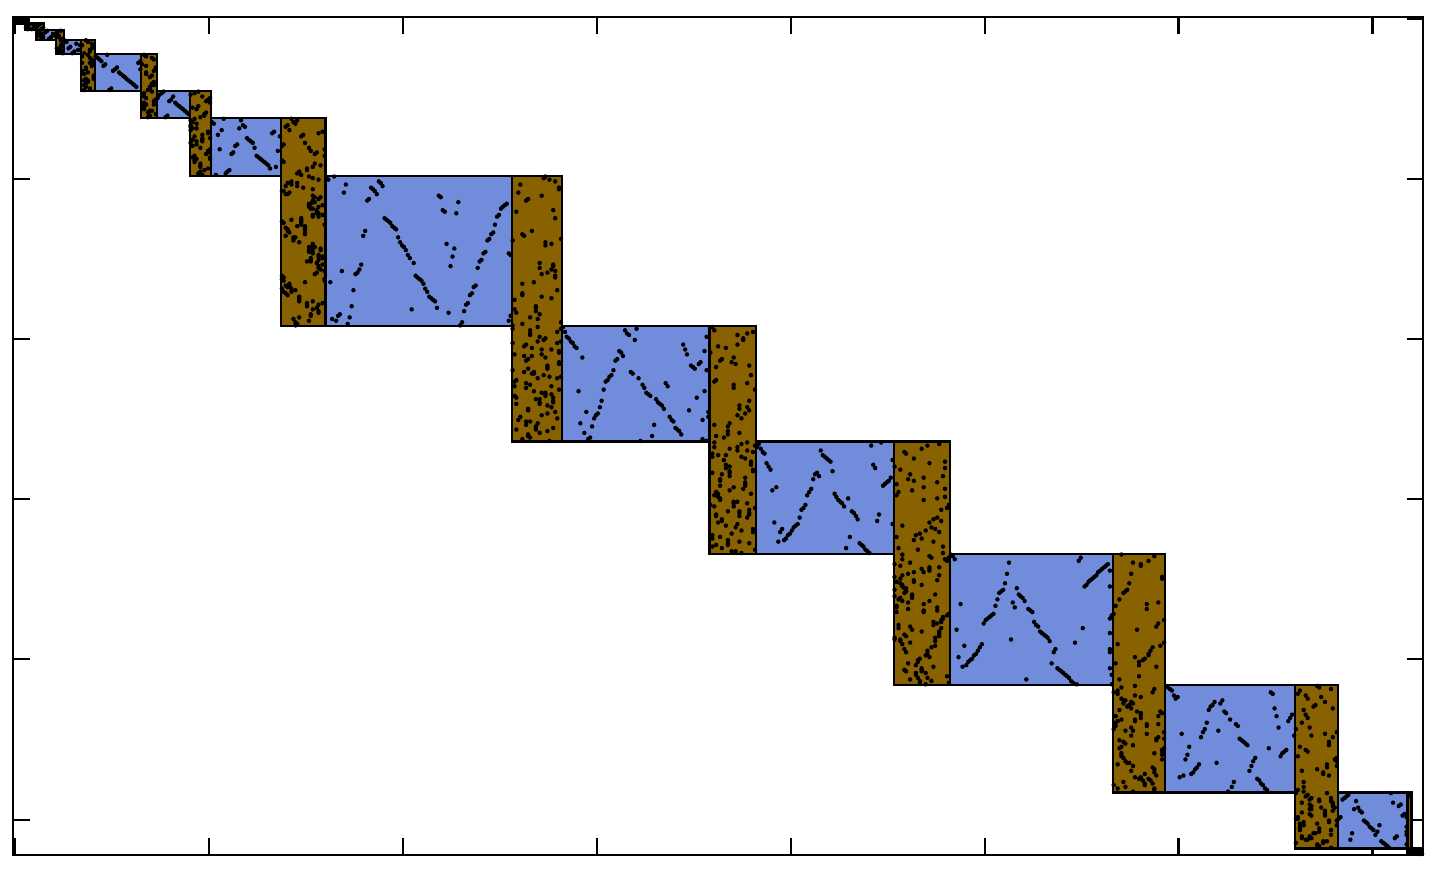 staircase structure in a matrix